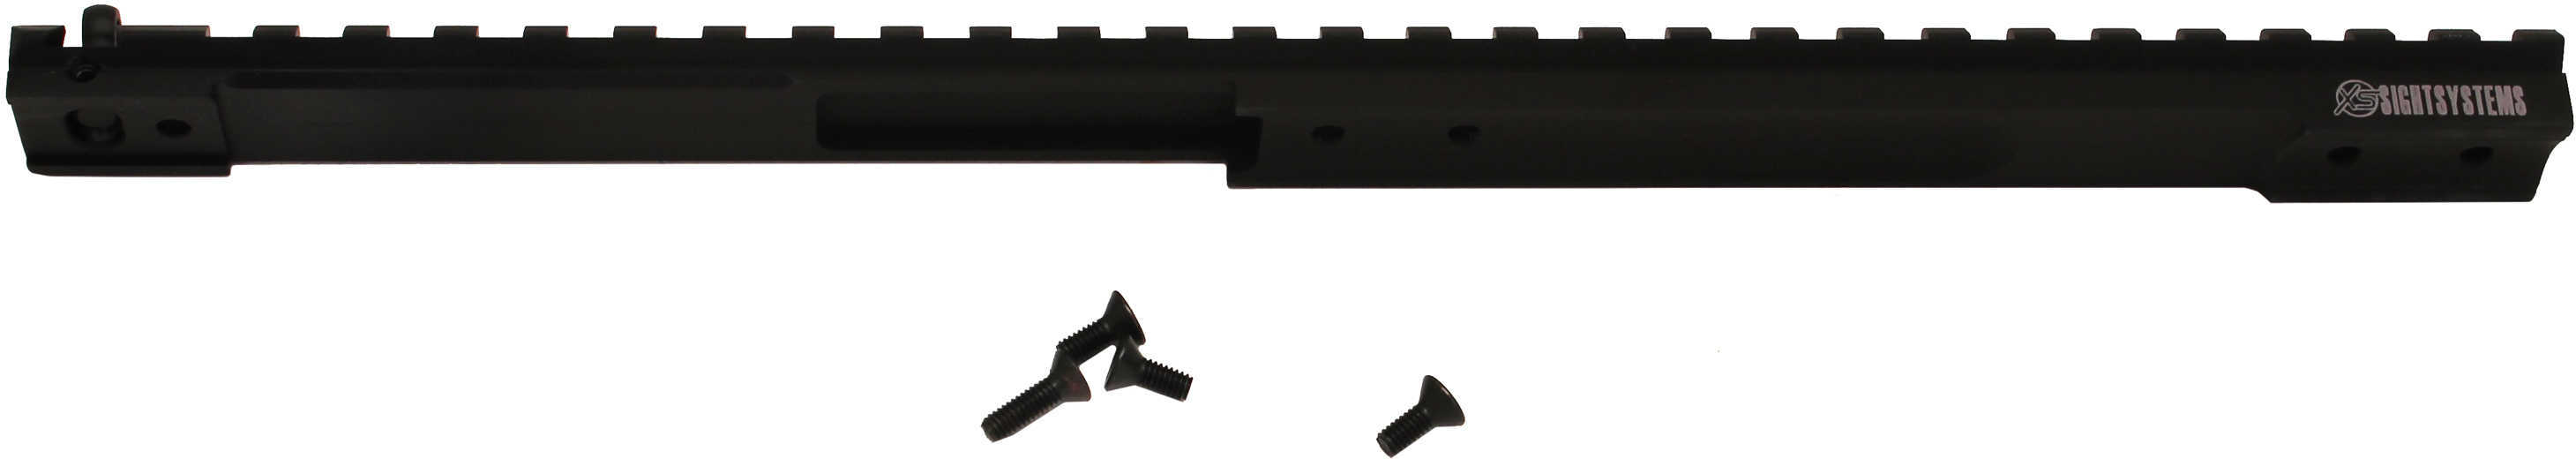 XS Sight Systems XS Full Length Scope Rail For Ruger Gunsite Scout Rifle